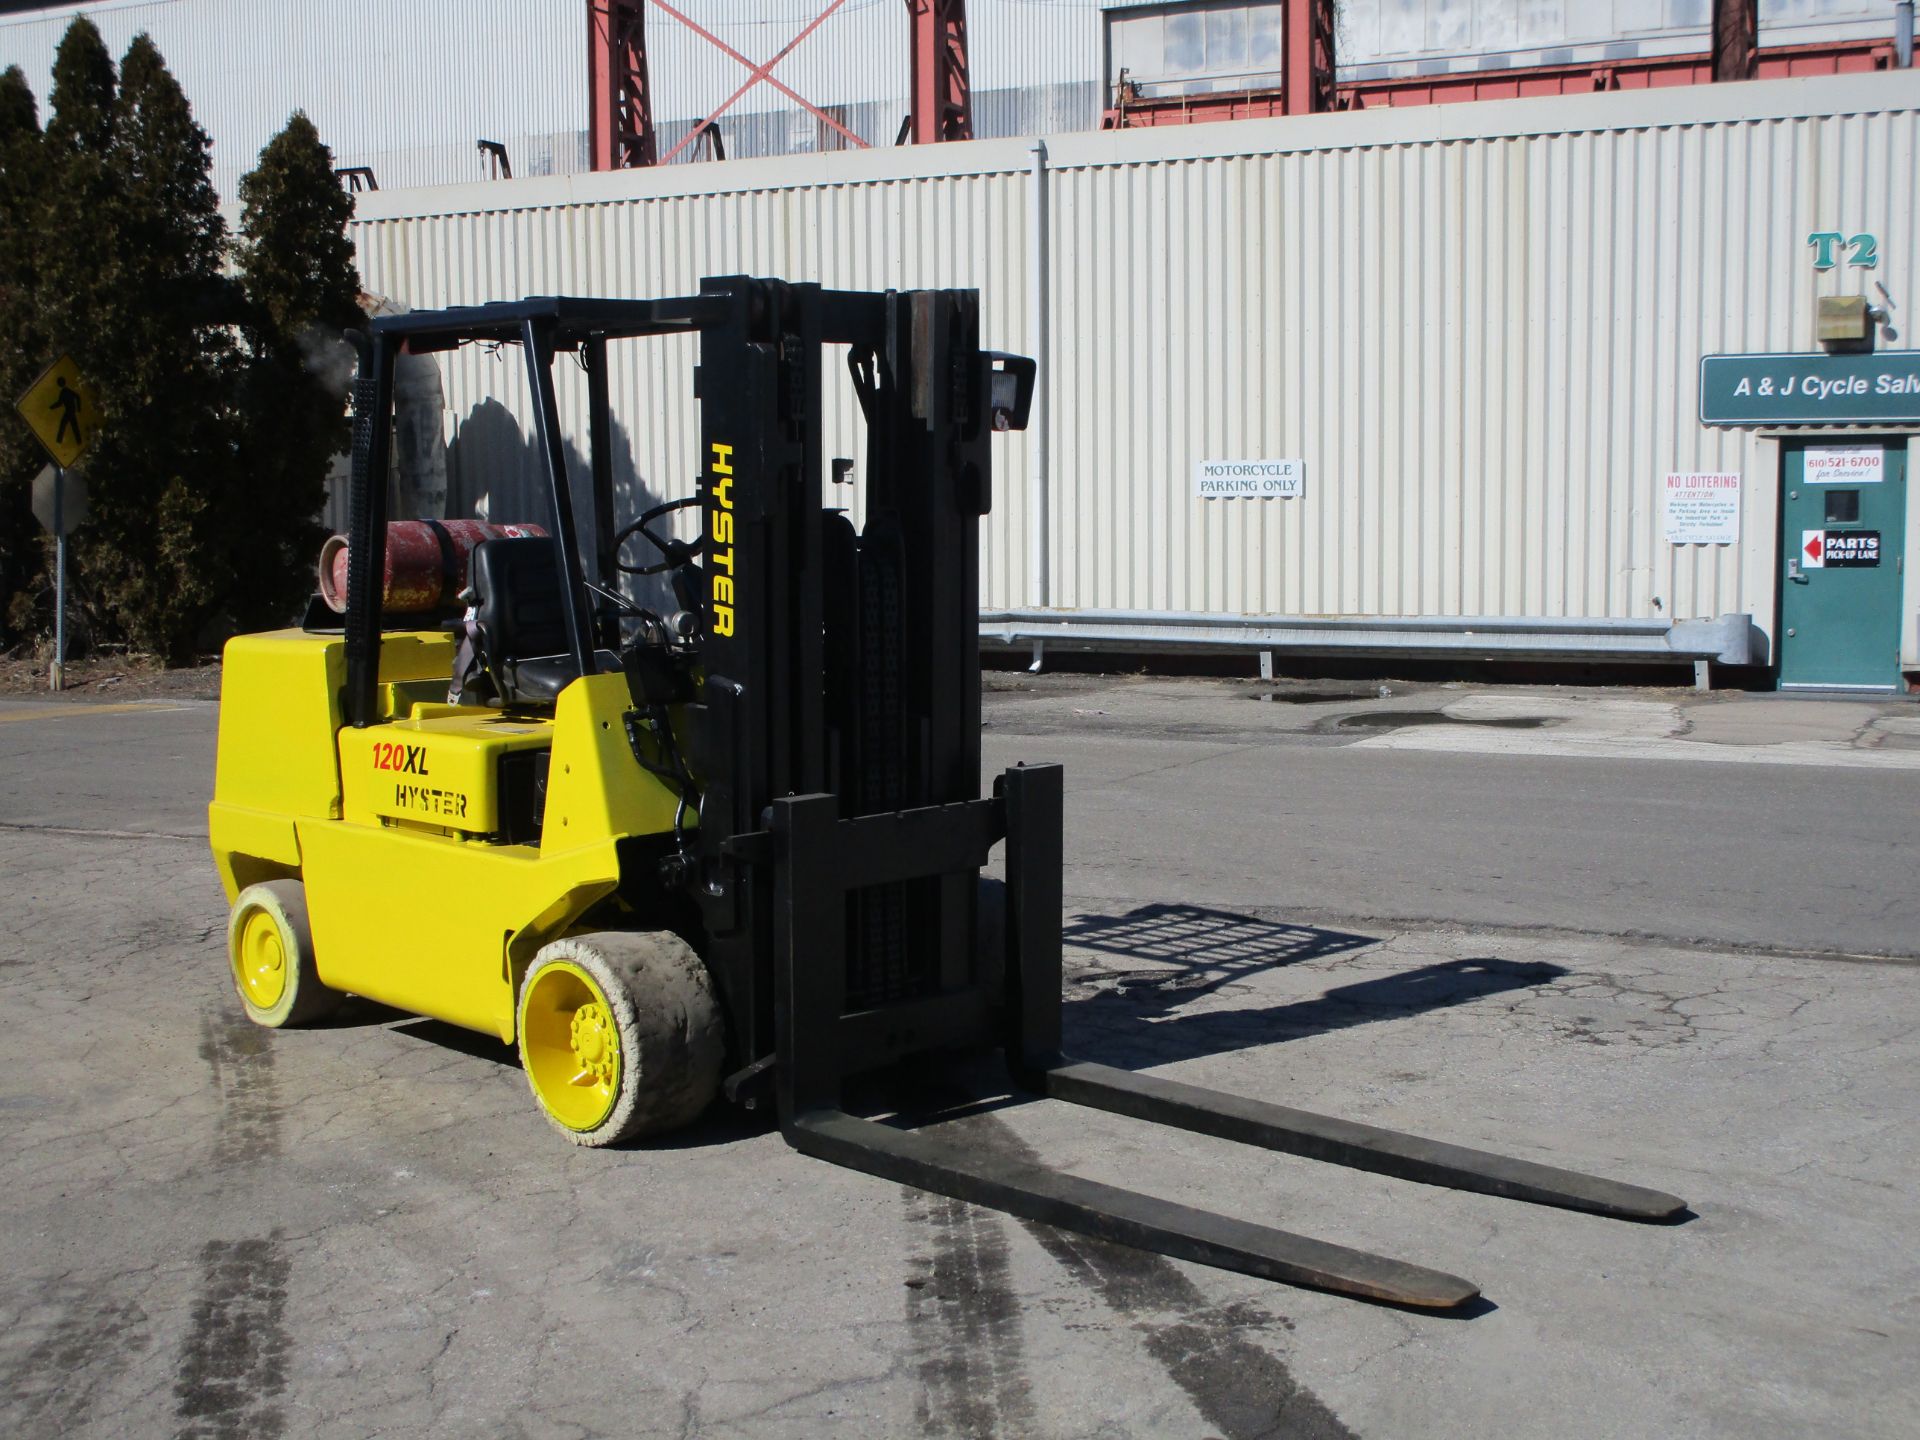 Hyster S120XL 12,000lb Forklift - Image 10 of 17